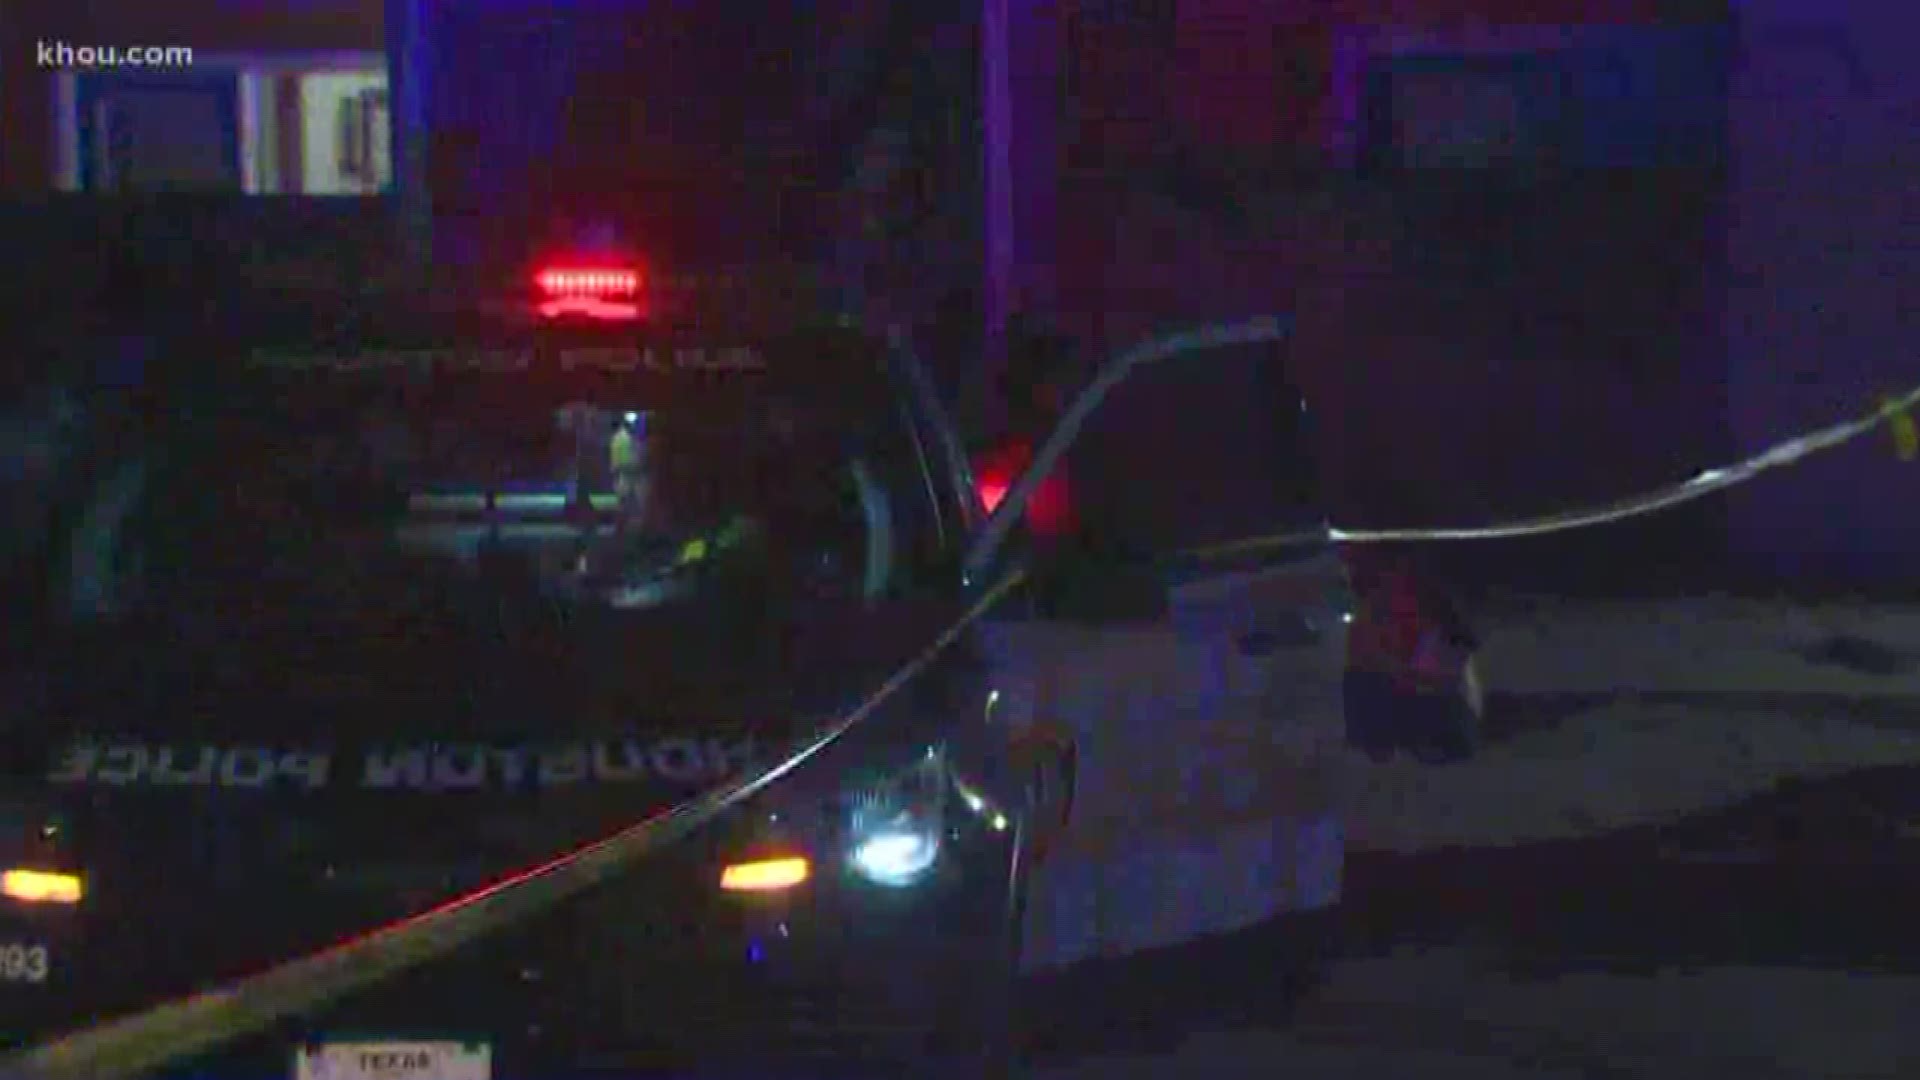 A 16-year-old boy was shot and killed in the Greenspoint area on Thursday night.